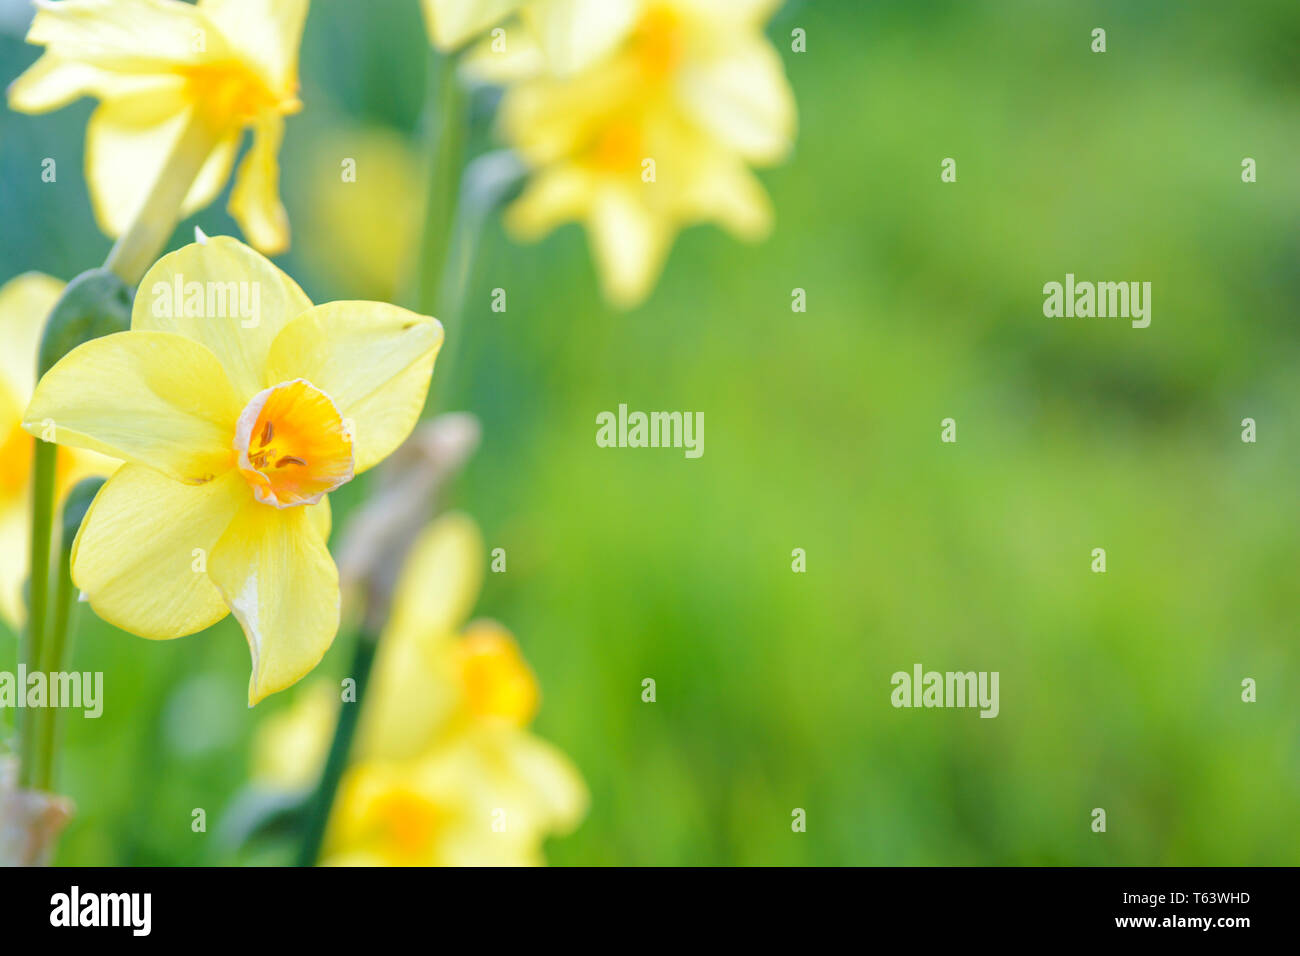 Springtime flowers growing outside with grass background Stock Photo